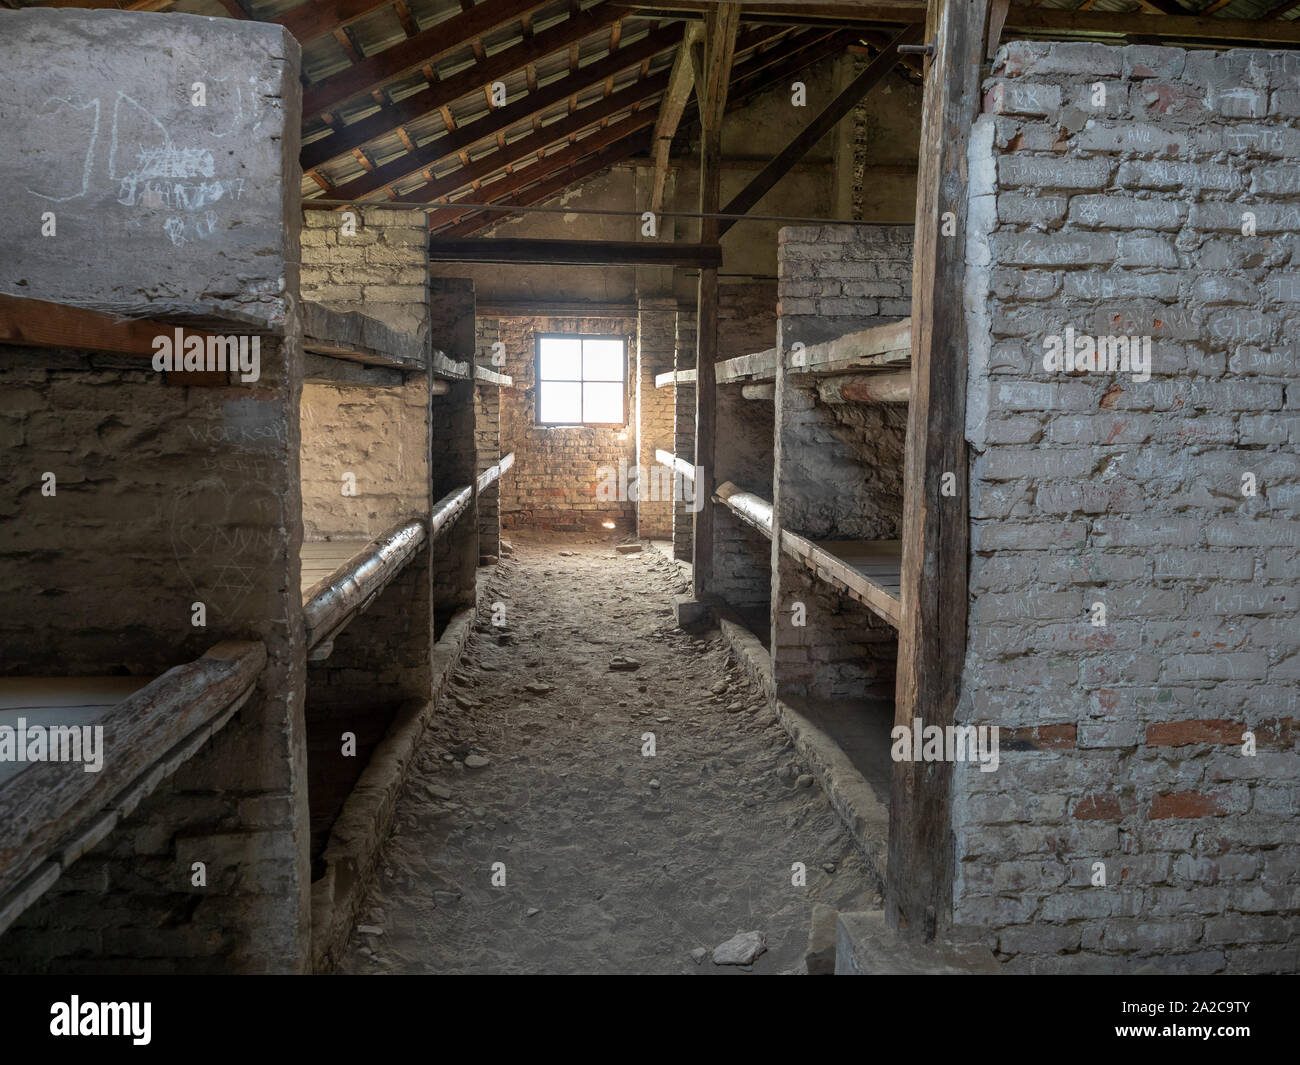 Accommodation Block in the Auschwitz-Birkenau Concentration Camp, Poland Stock Photo